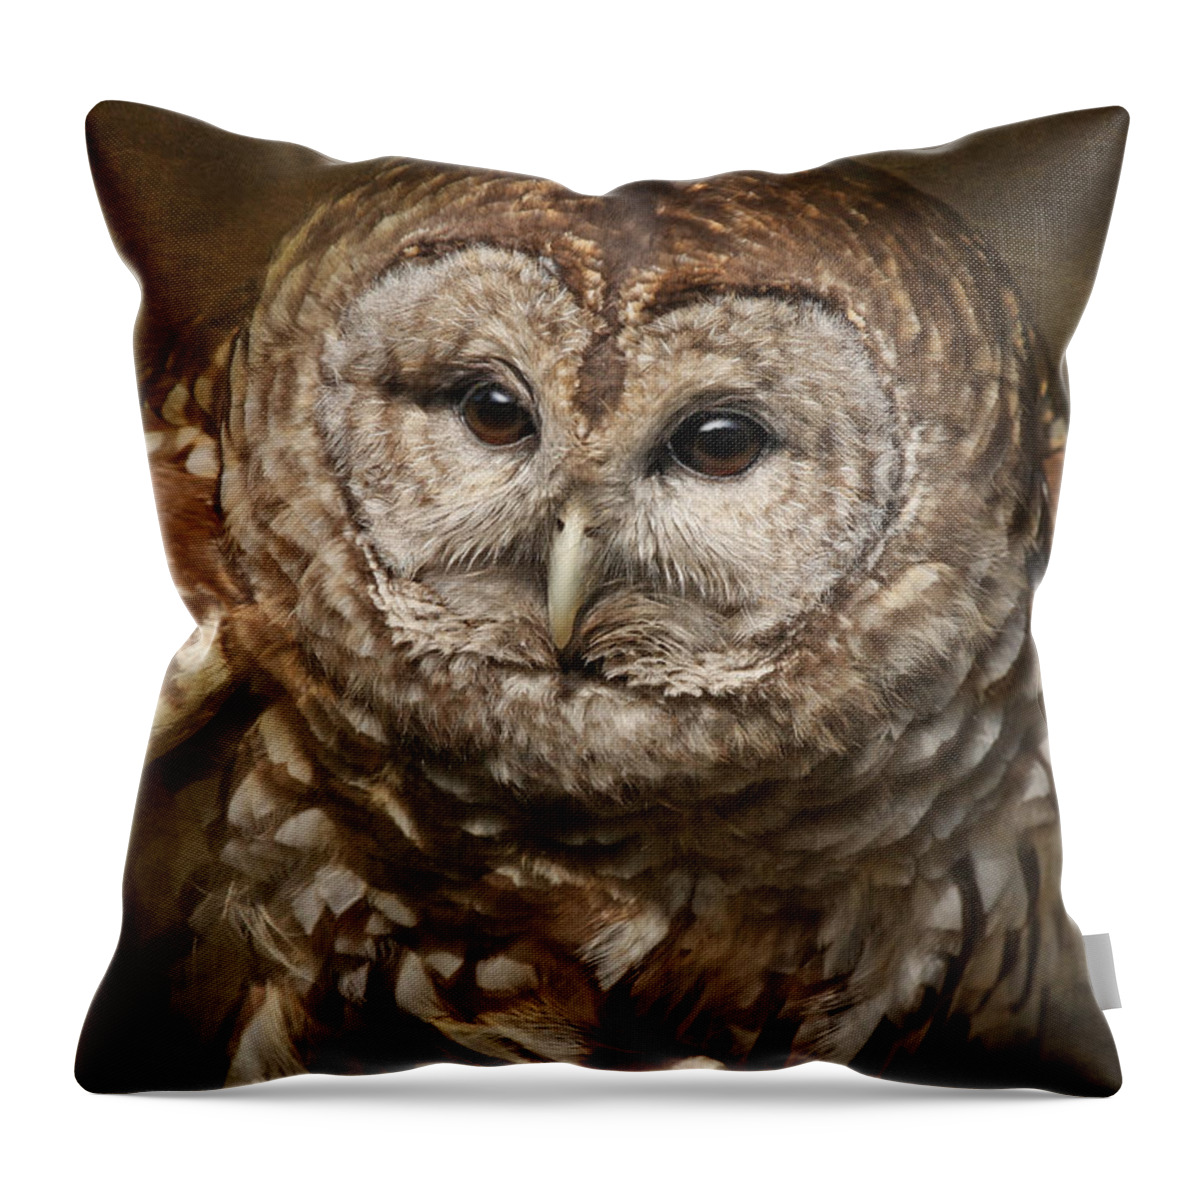 Owls Throw Pillow featuring the photograph Vilma Up Close by Pat Abbott